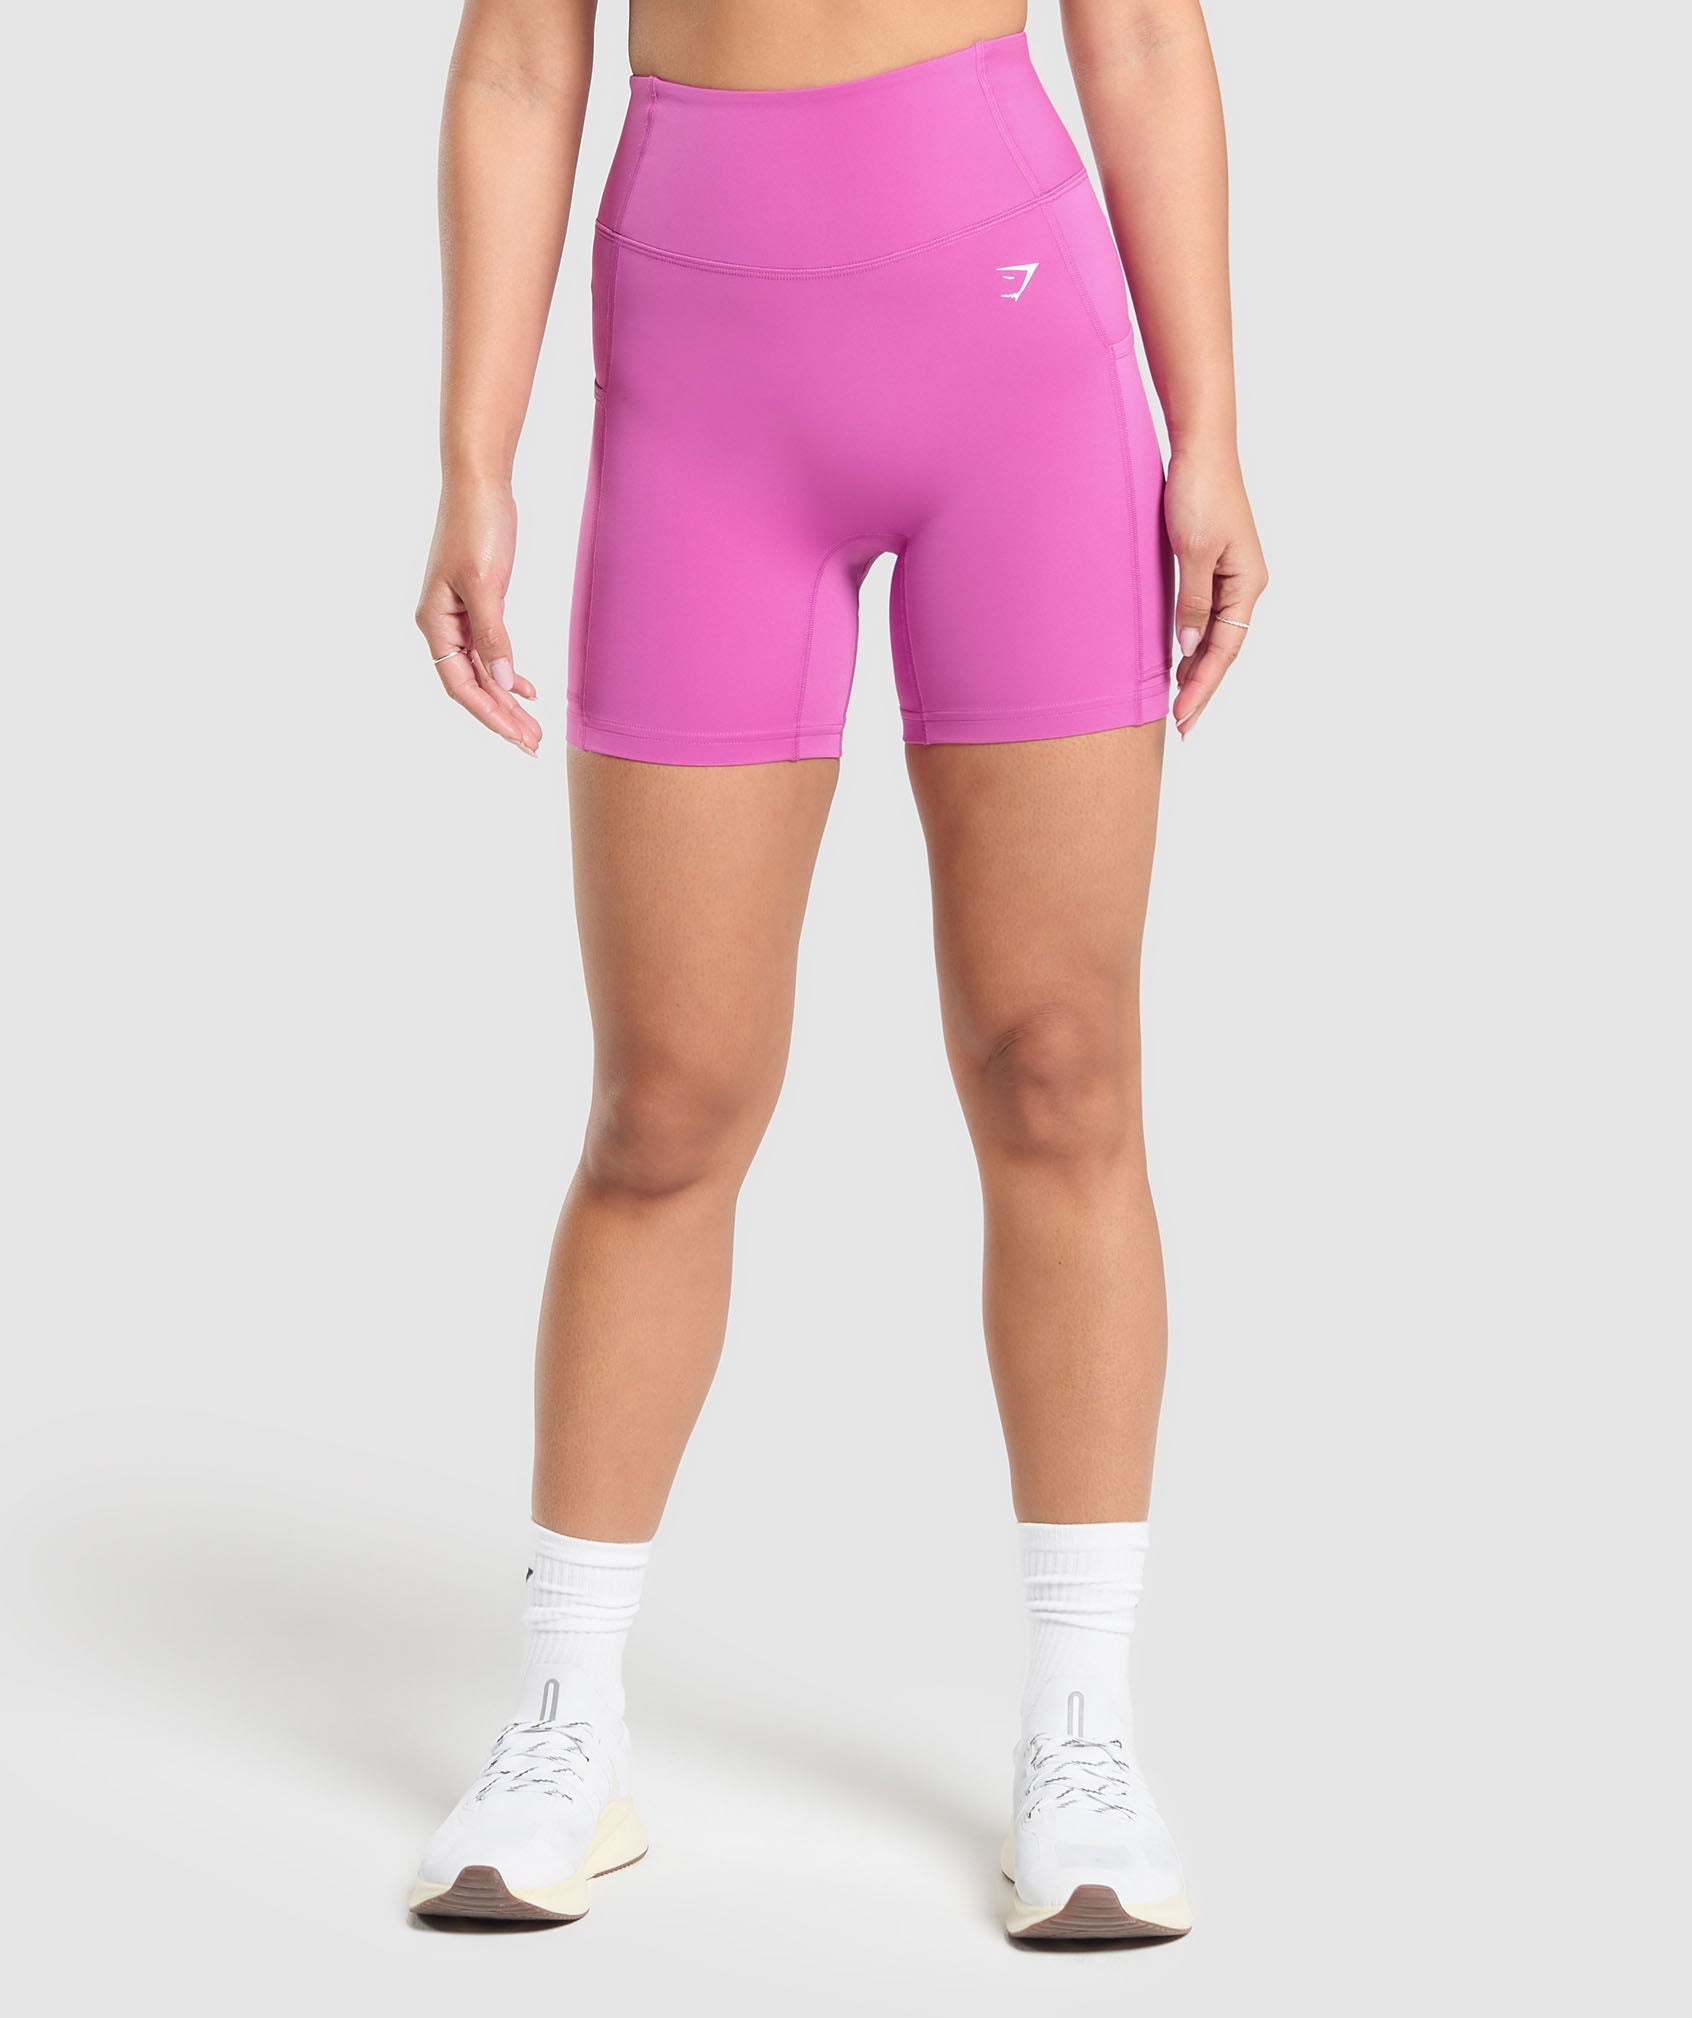 Pocket Shorts in Shelly Pink - view 2